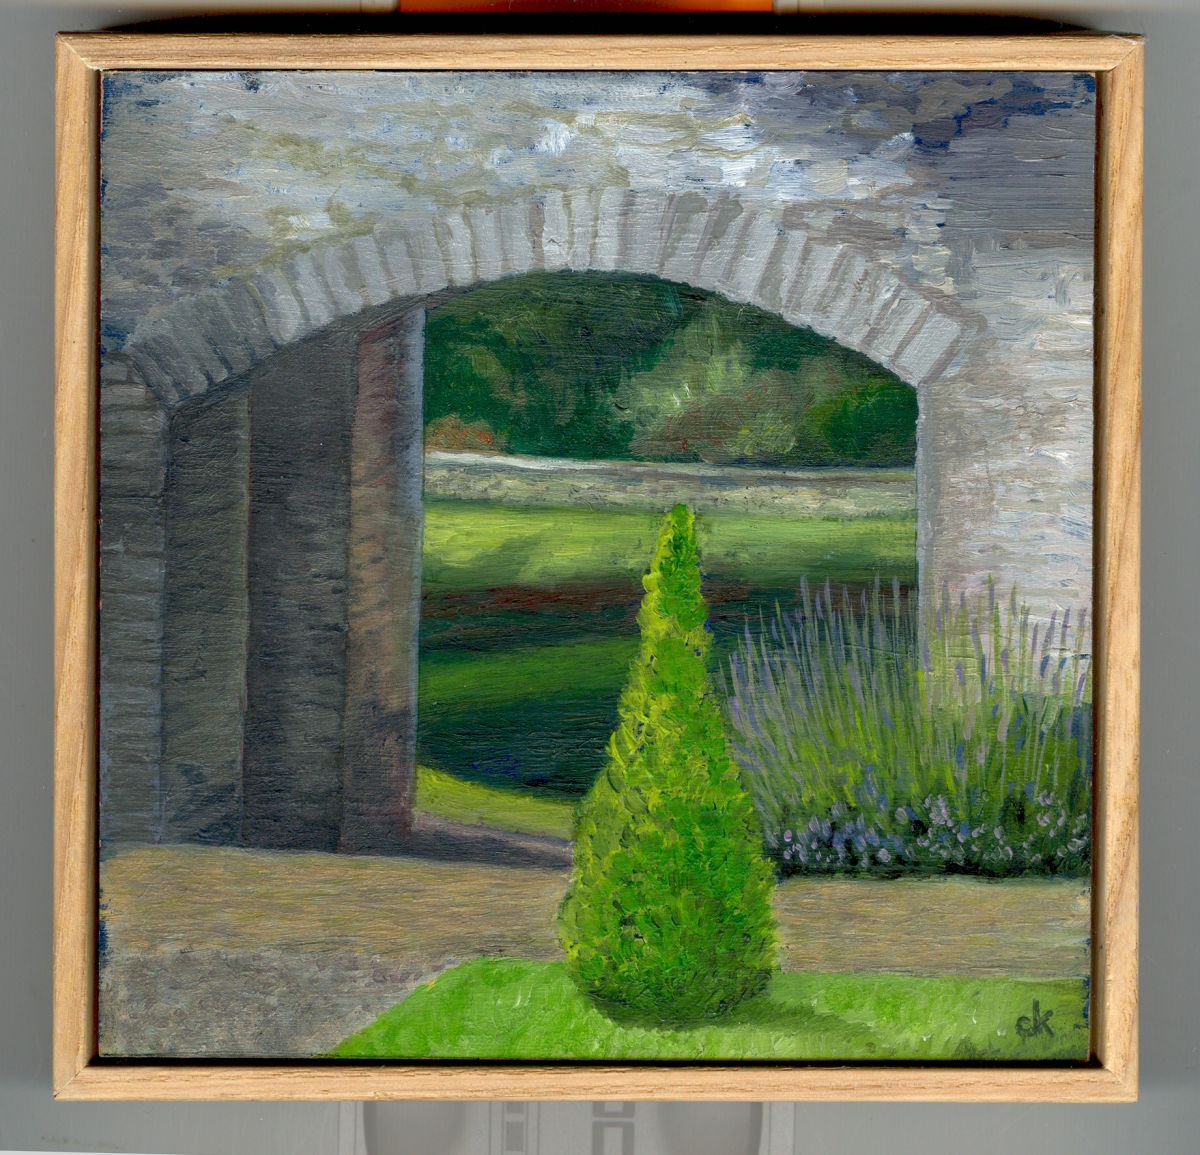 Aberglasney Arches 1 by Carole King